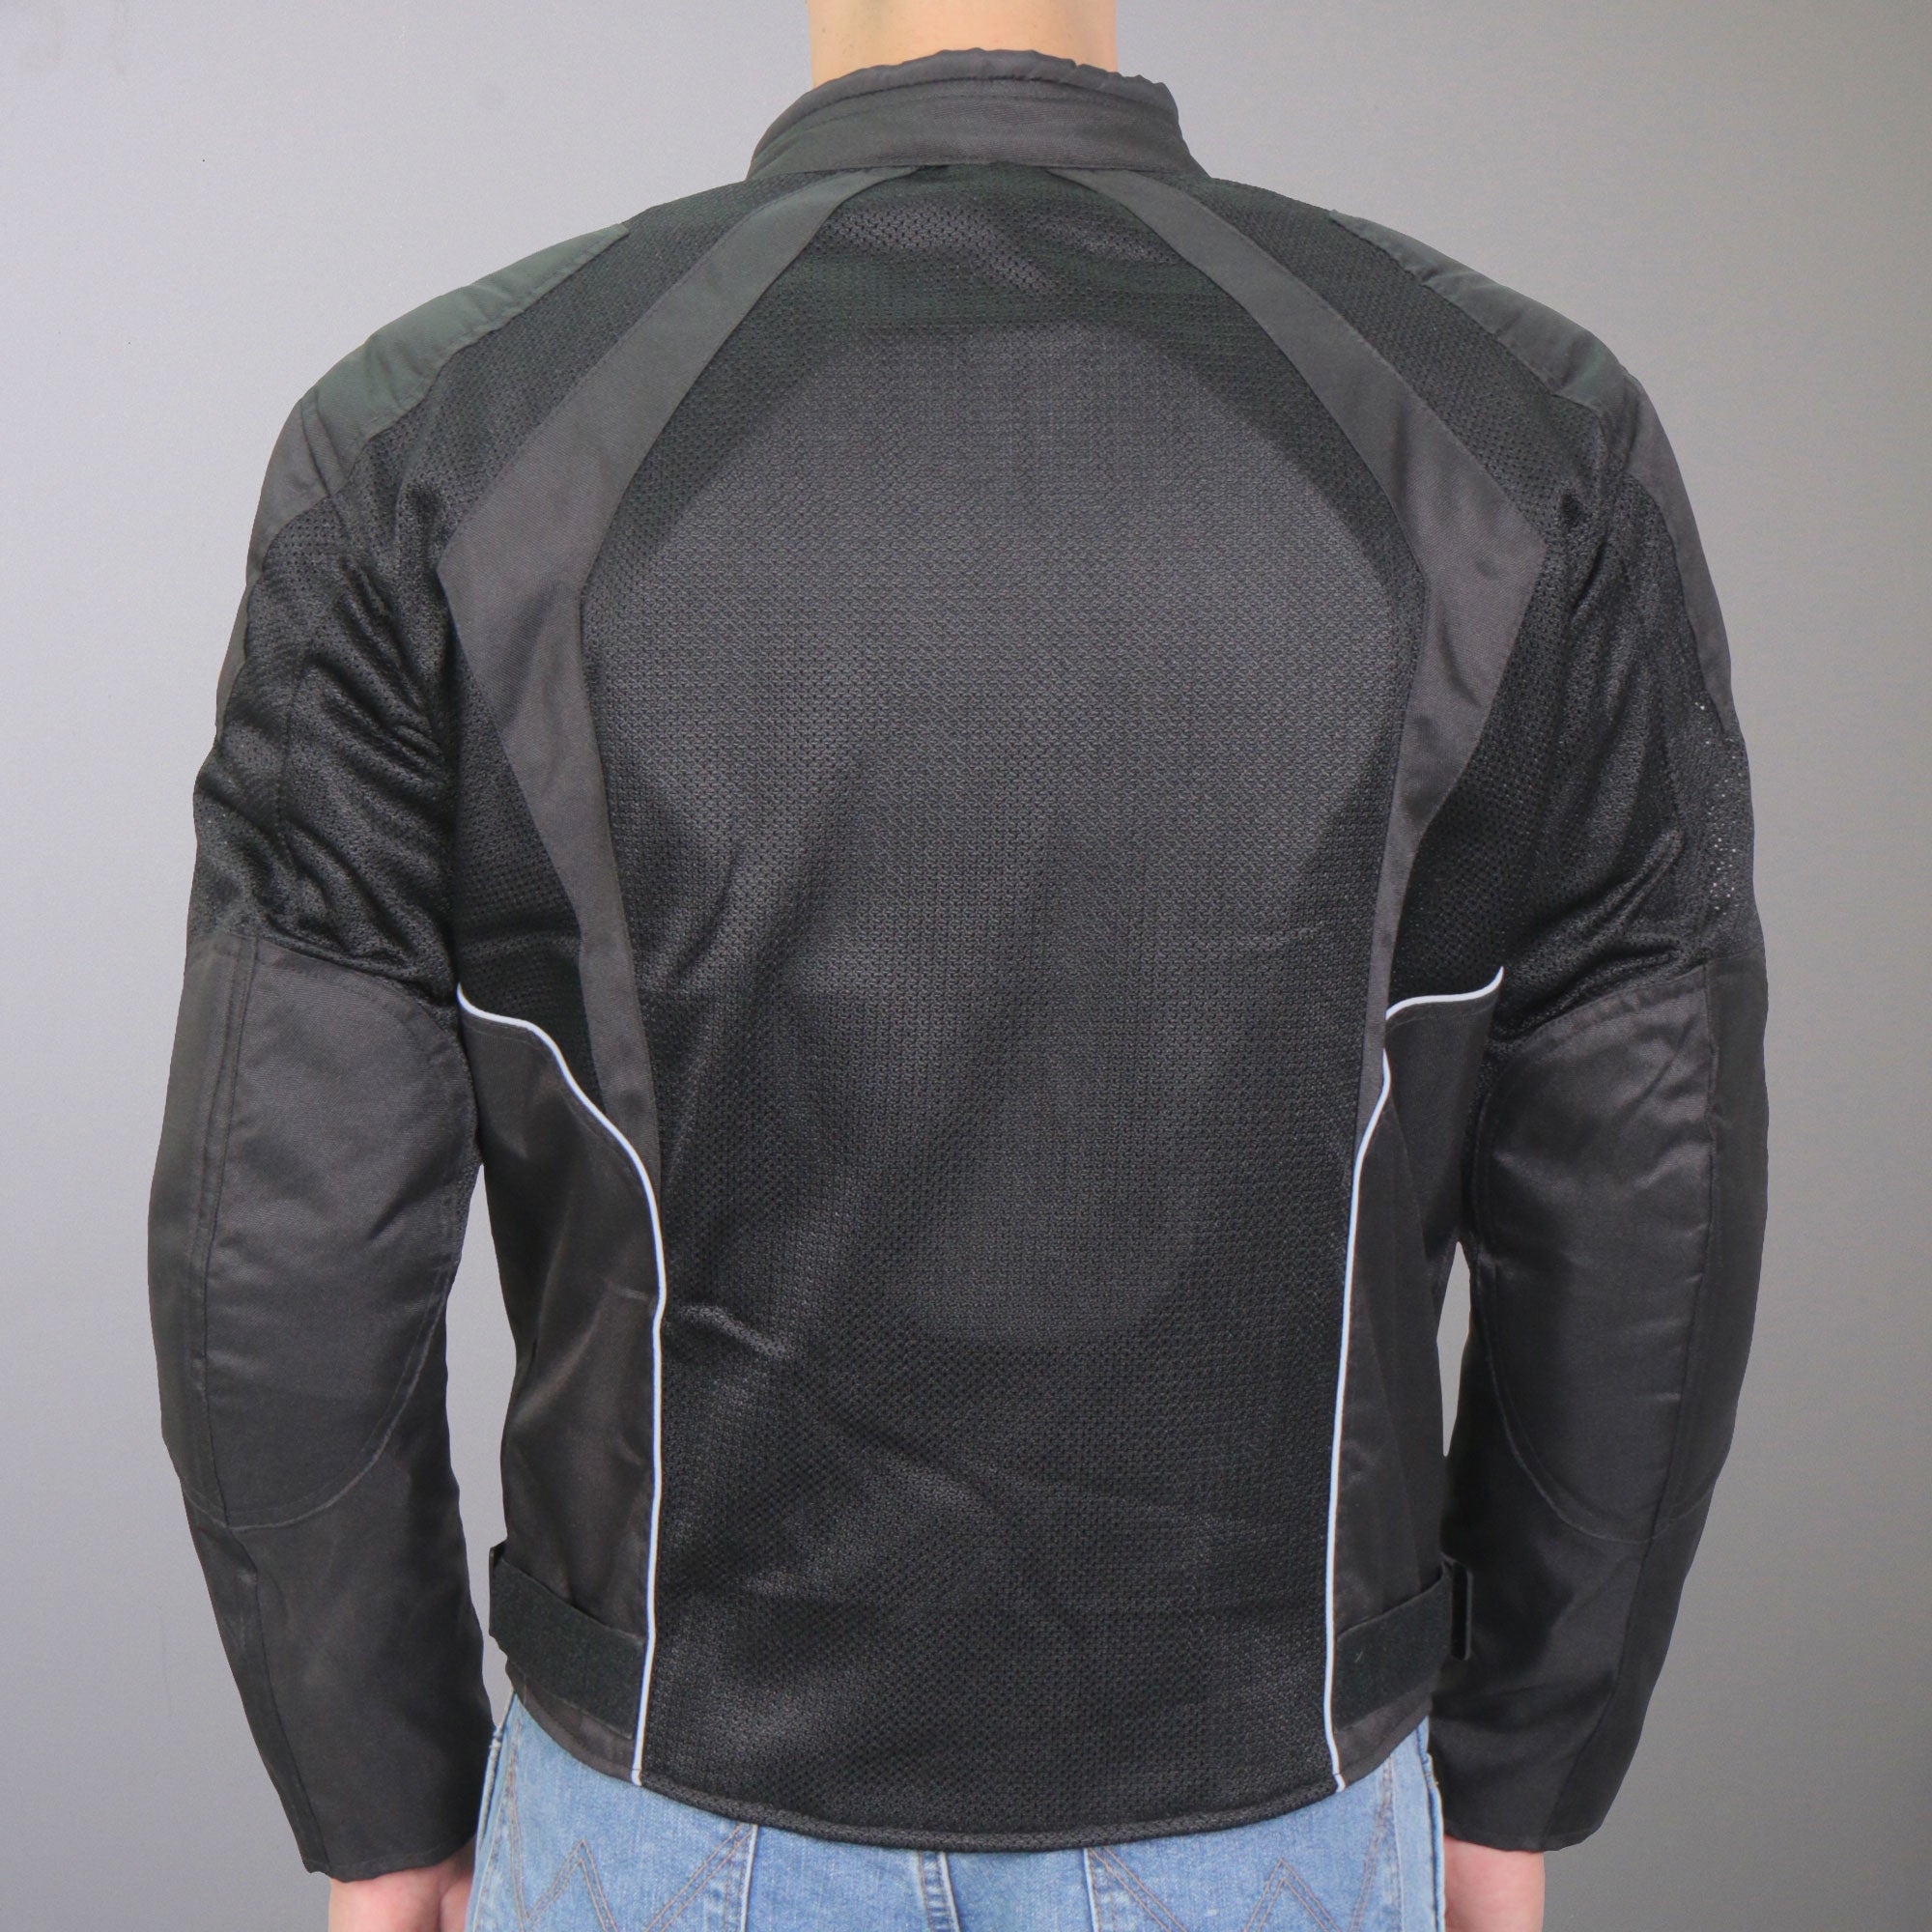 Hot Leathers JKM1025 Men’s Black Biker Armored Nylon Mesh Motorcycle Jacket with Reflective Piping and Concealed Carry Pocket